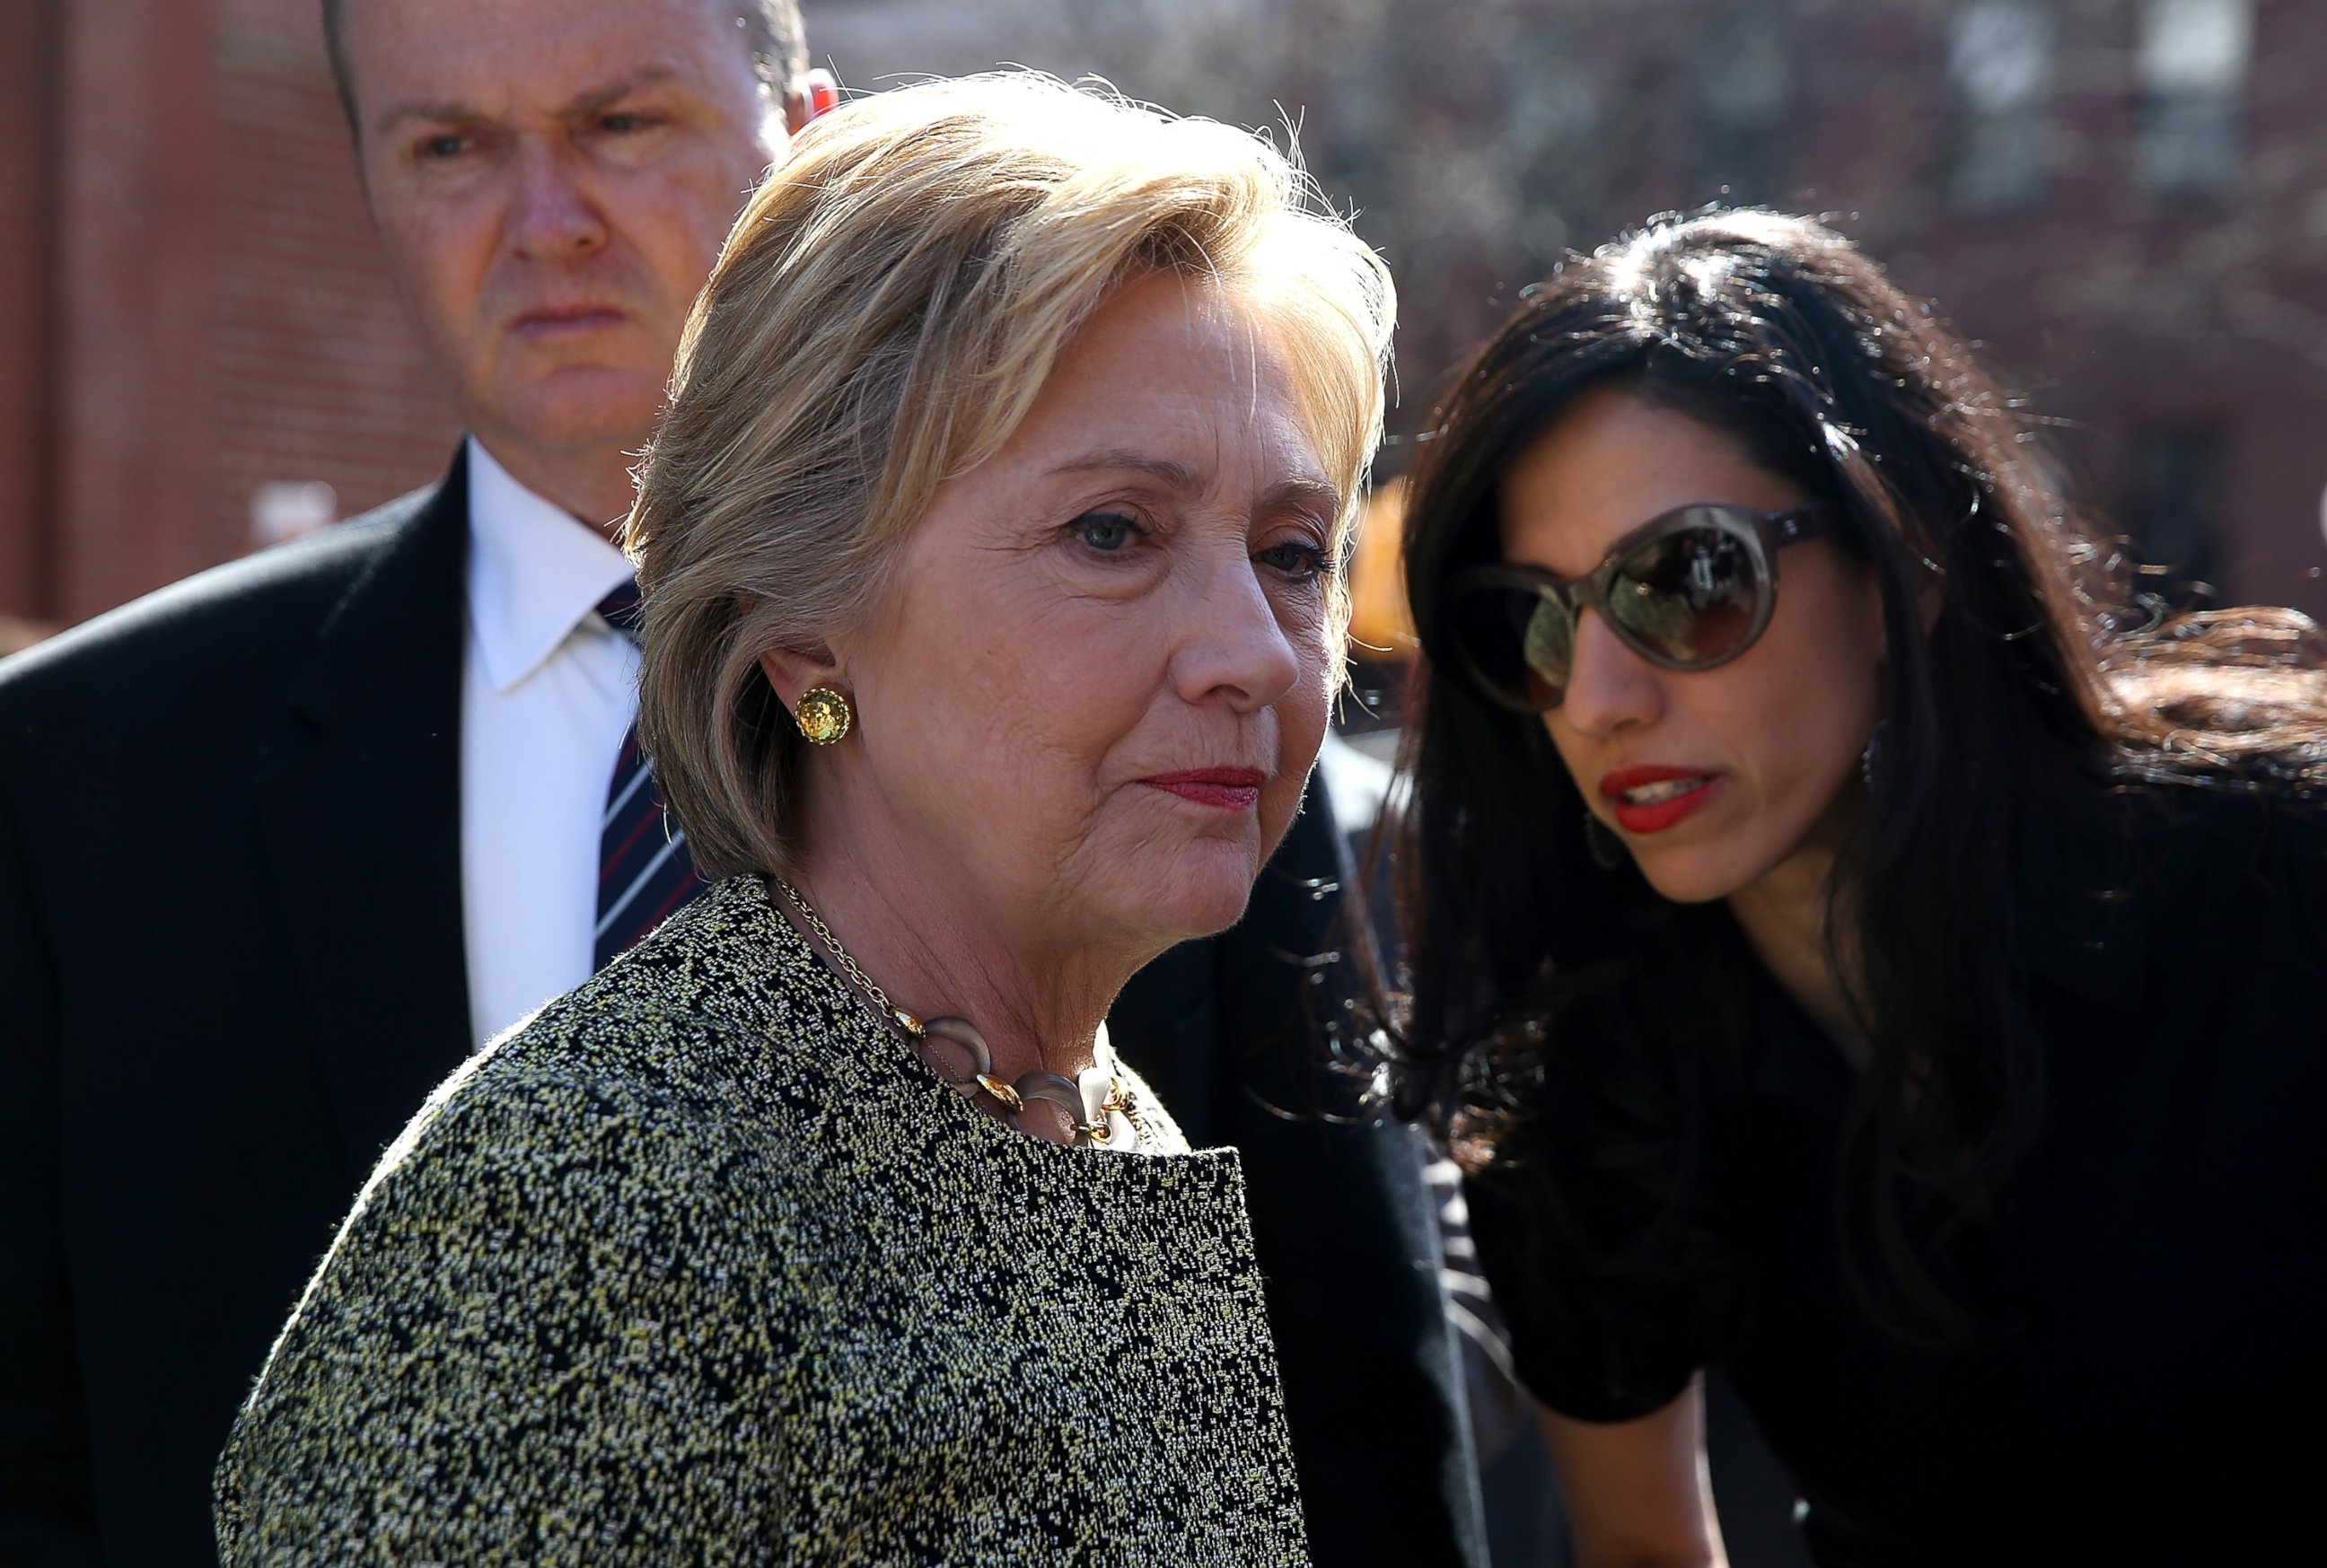 PHOTO: Democratic presidential candidate Hillary Clinton talks with aide Huma Abedin before speaking at a neighborhood block party in the Brooklyn borough of New York City, April 17, 2016.